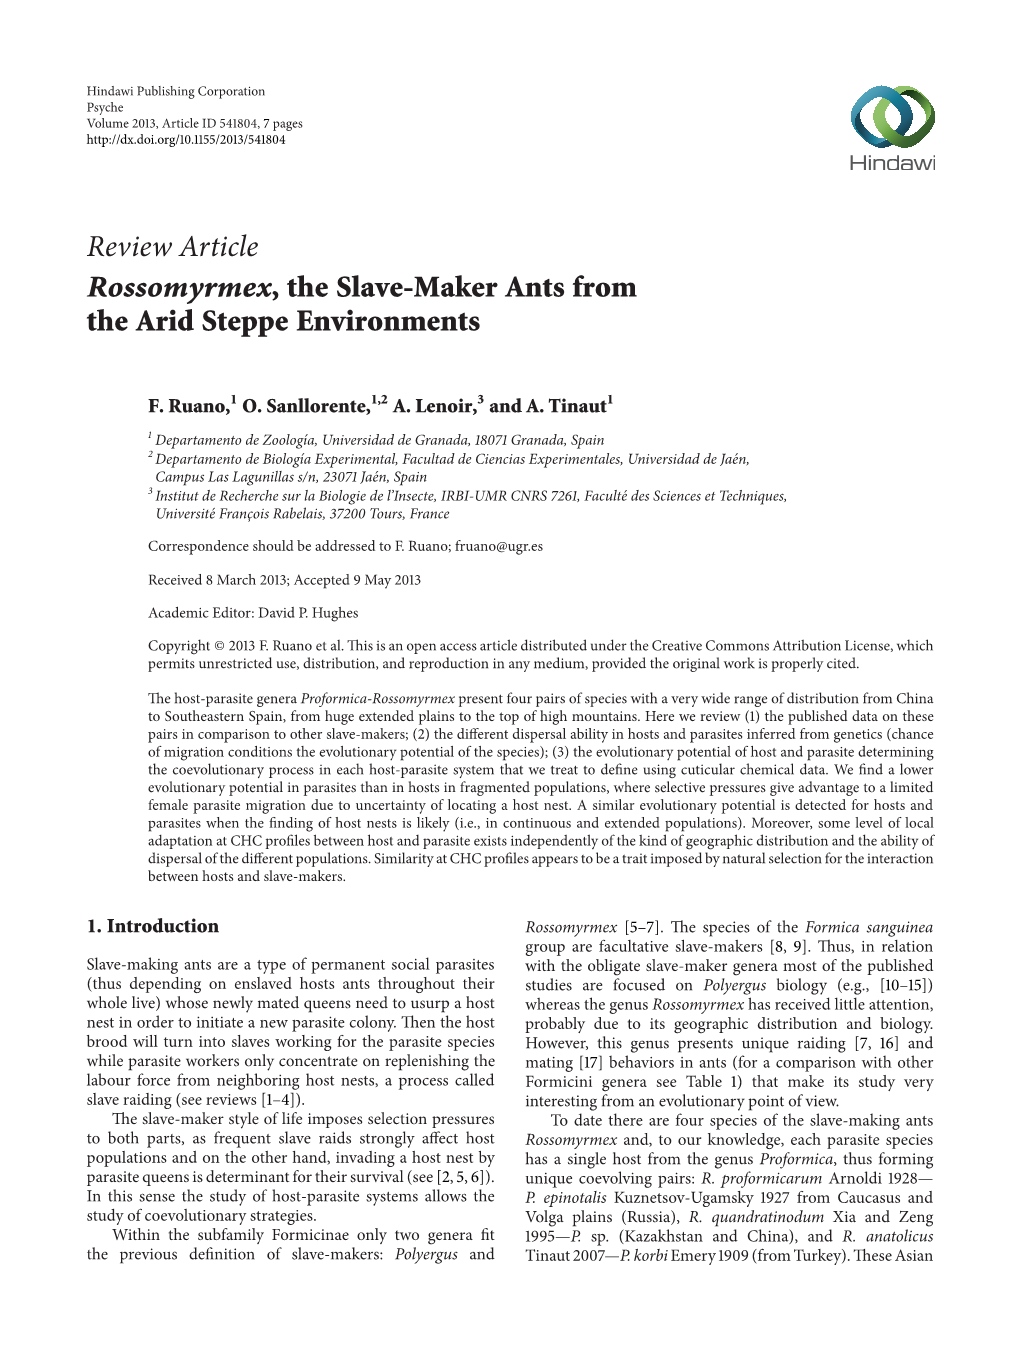 Review Article Rossomyrmex, the Slave-Maker Ants from the Arid Steppe Environments